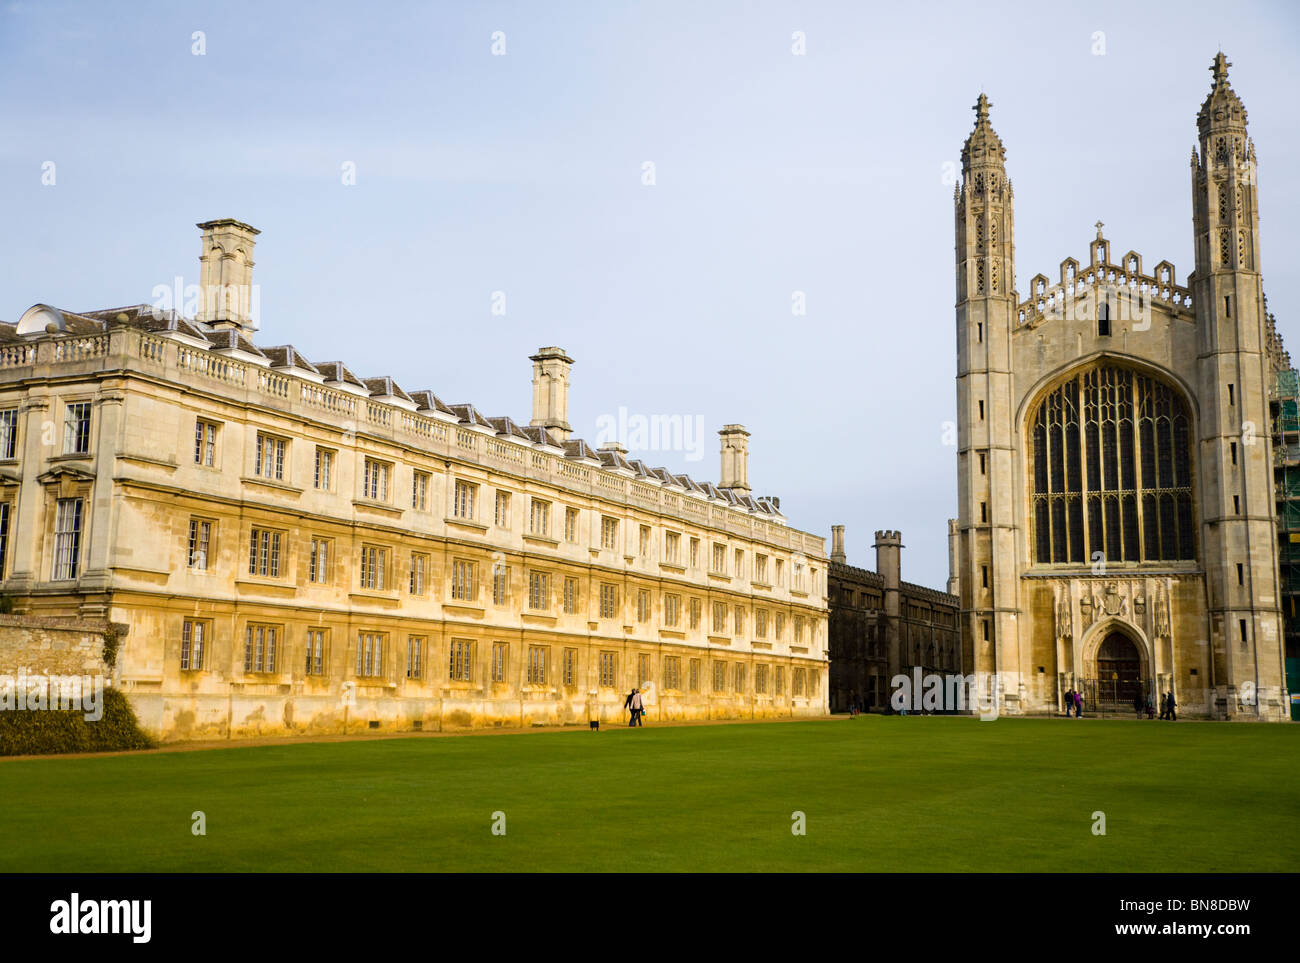 West facade of King's College chapel, with Clare College / Clare's Old Court to left. Cambridge University. Seen from The Backs. Stock Photo